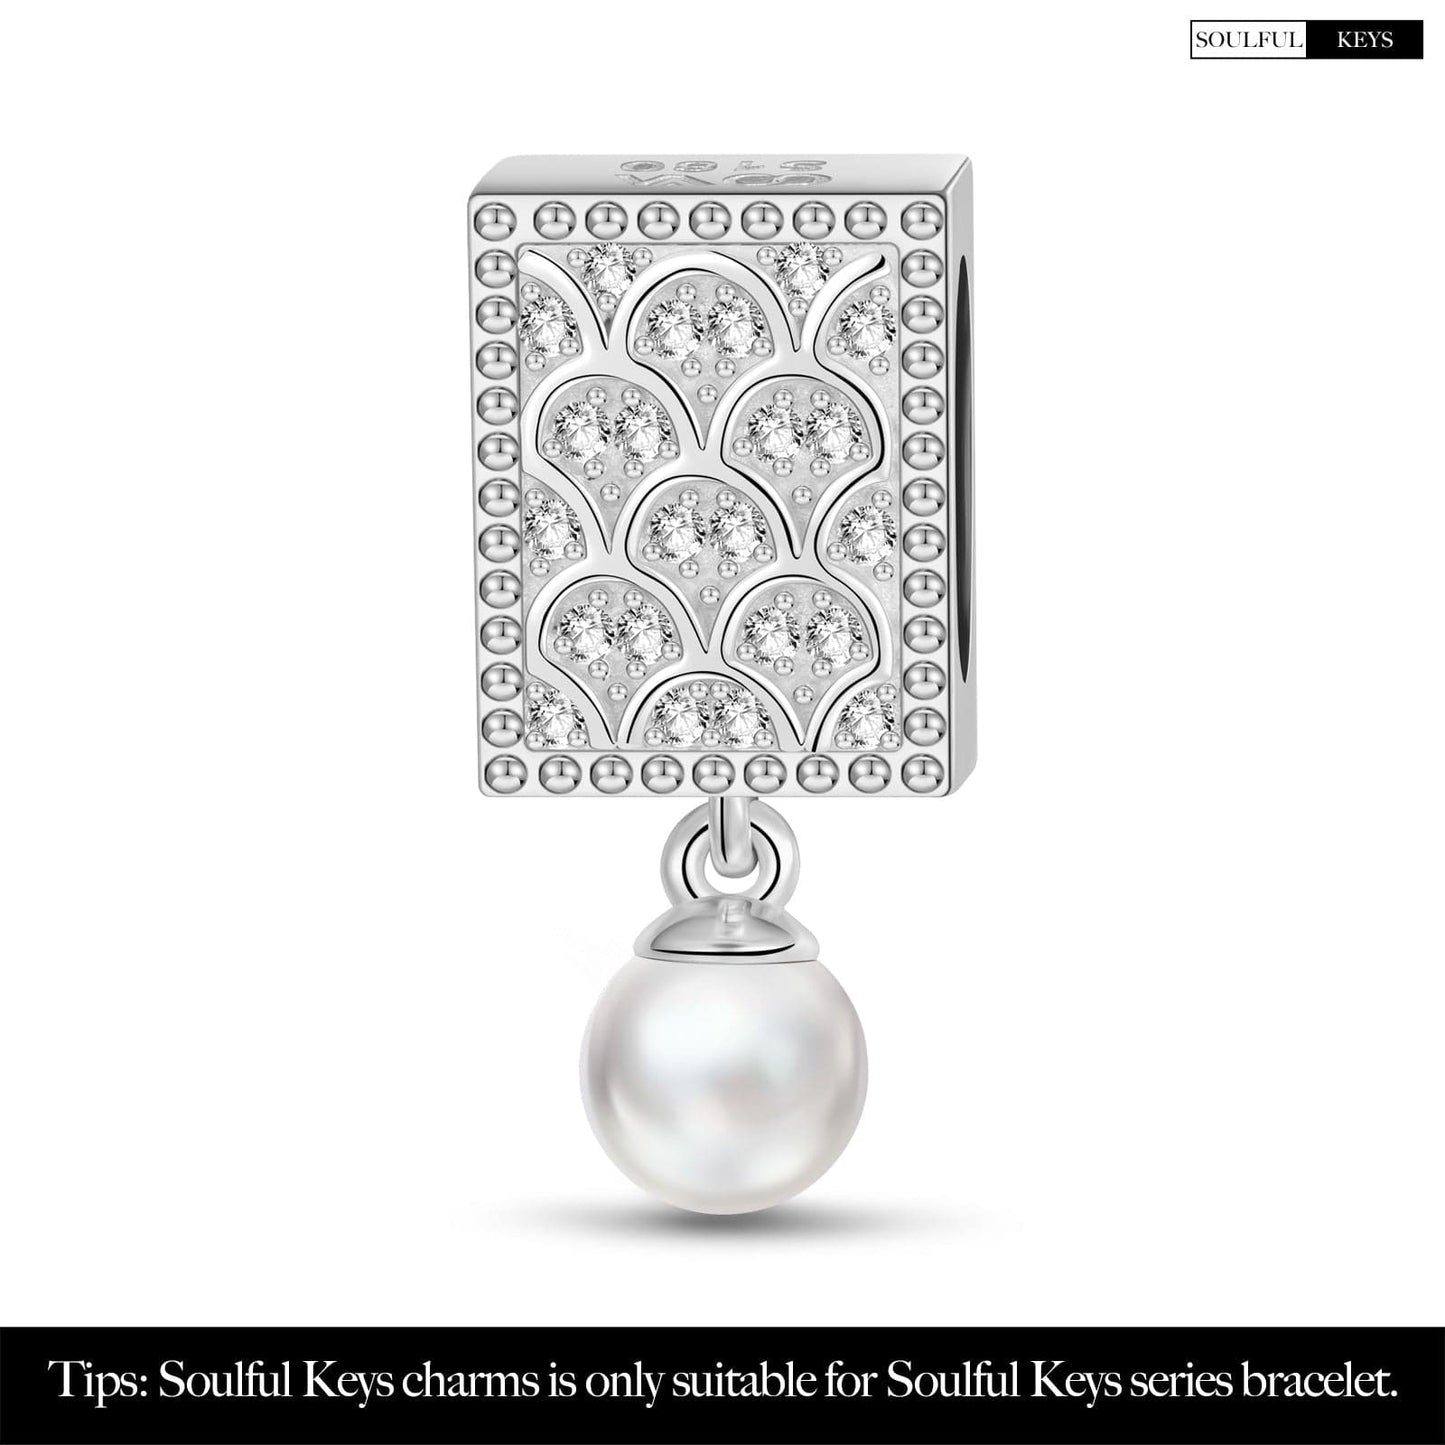 Mermaid's Pearls Tarnish-resistant Silver Rectangular Charms In White Gold Plated